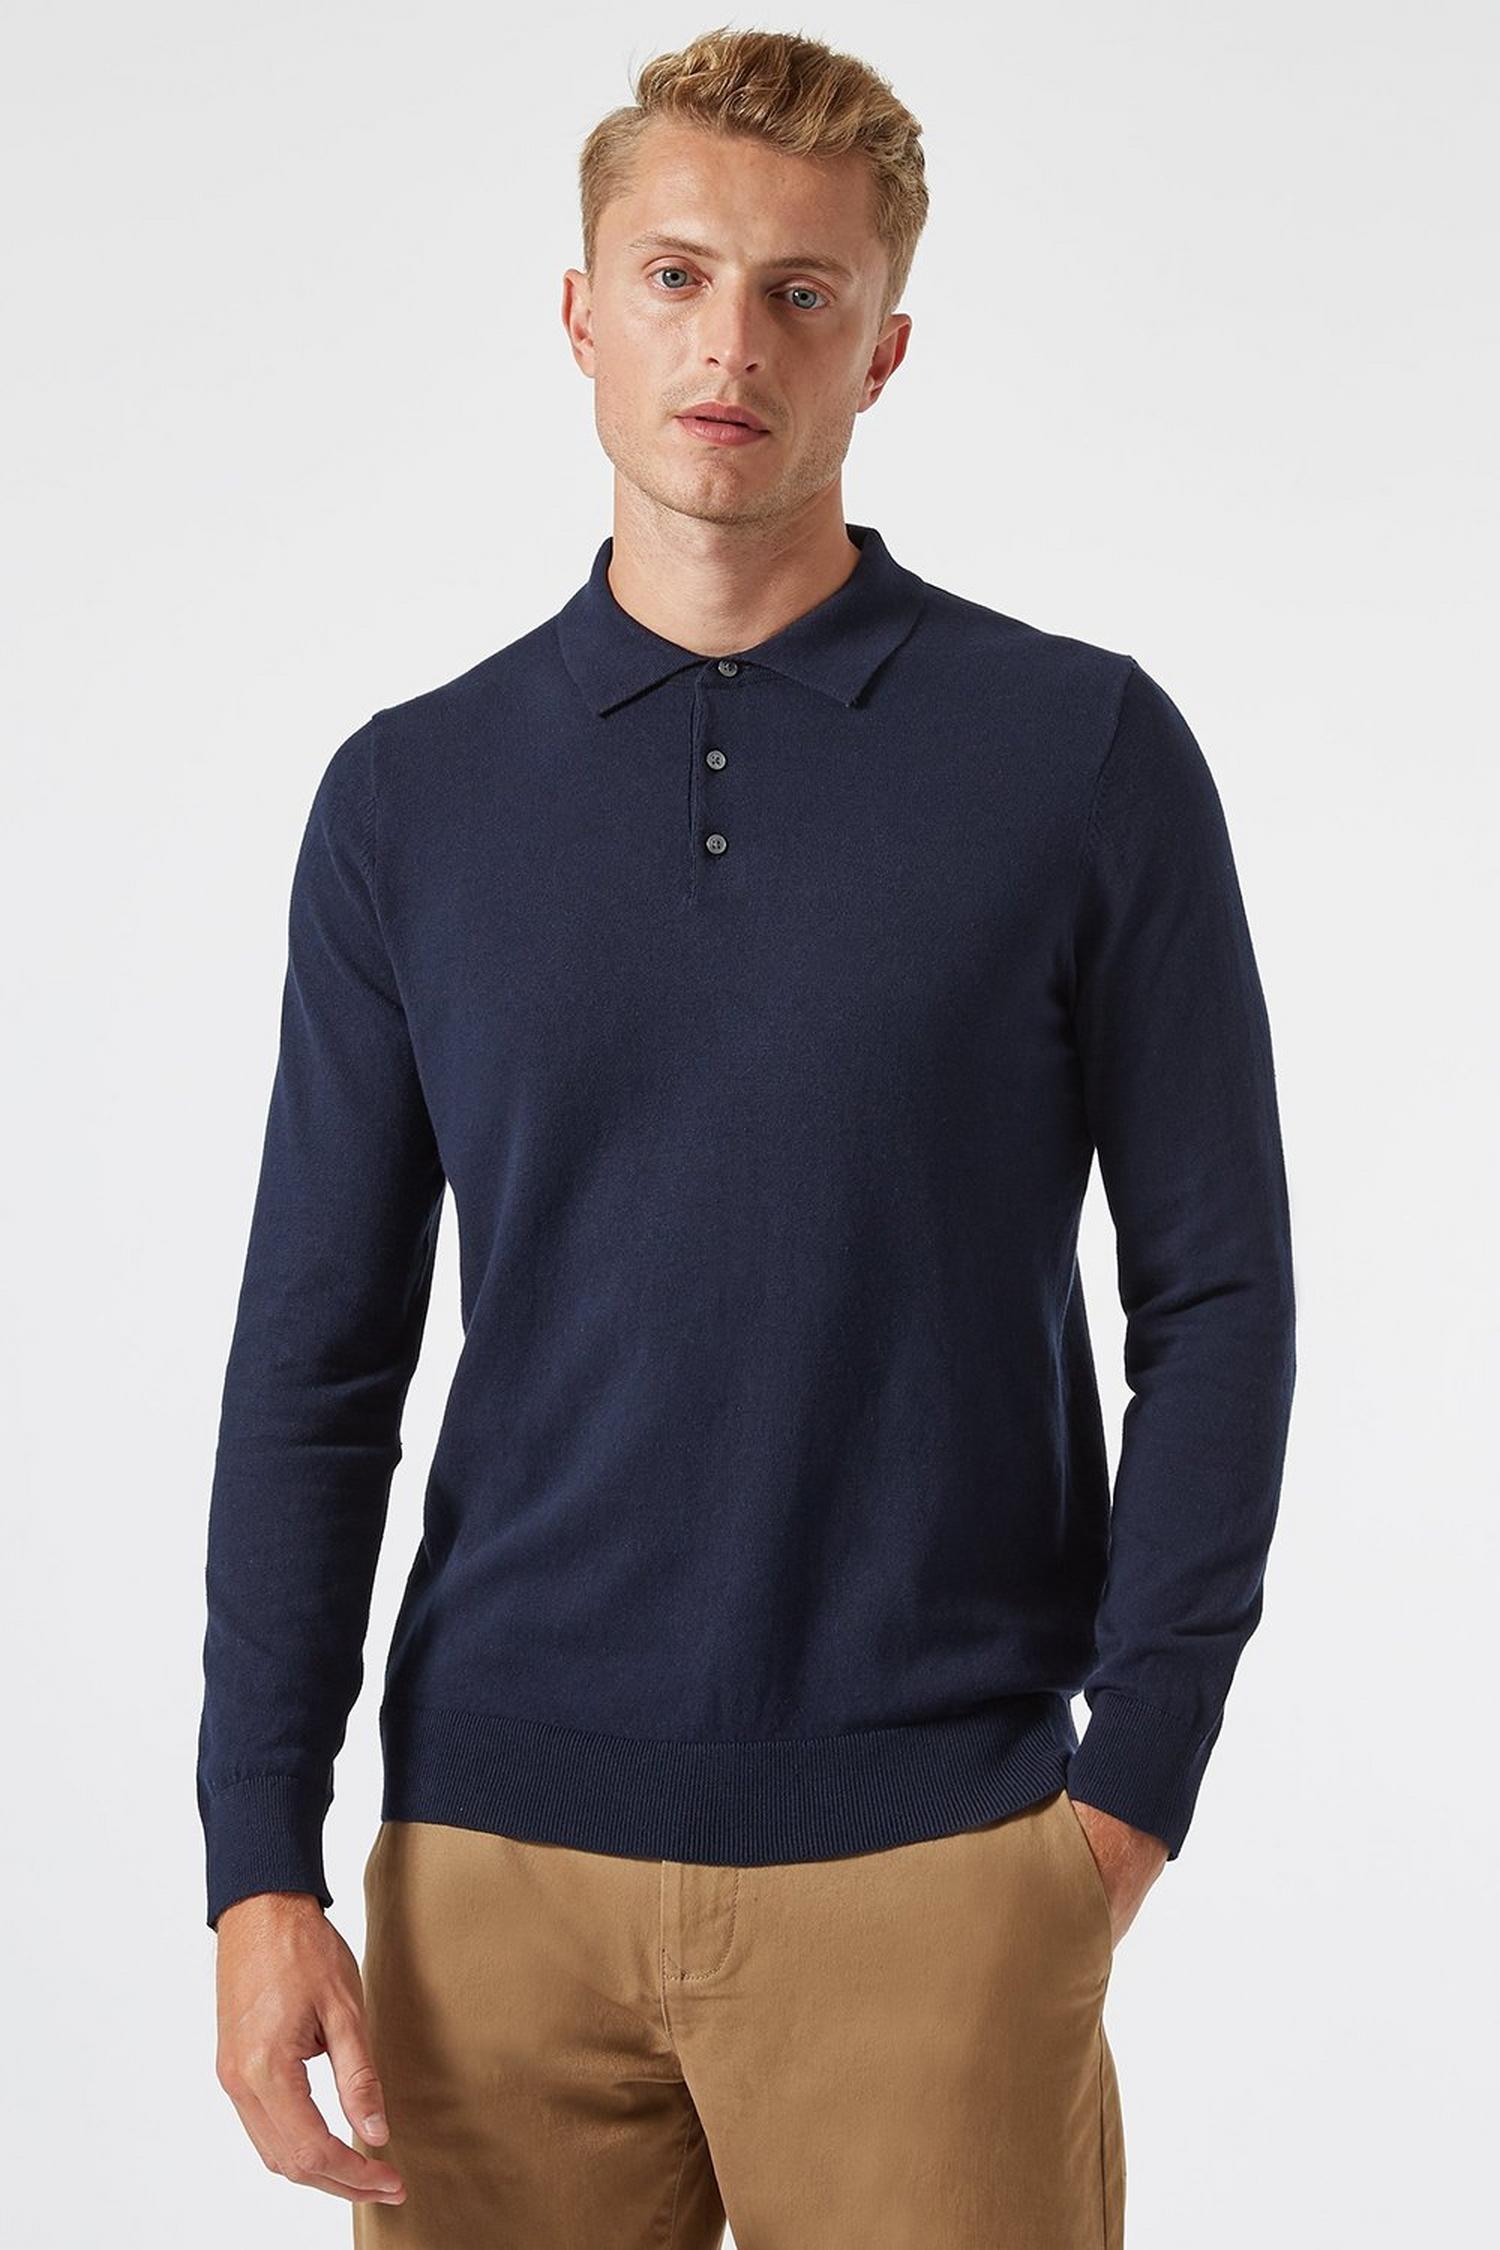 Navy Knitted Polo Neck Jumper with Organic Cotton | Burton UK